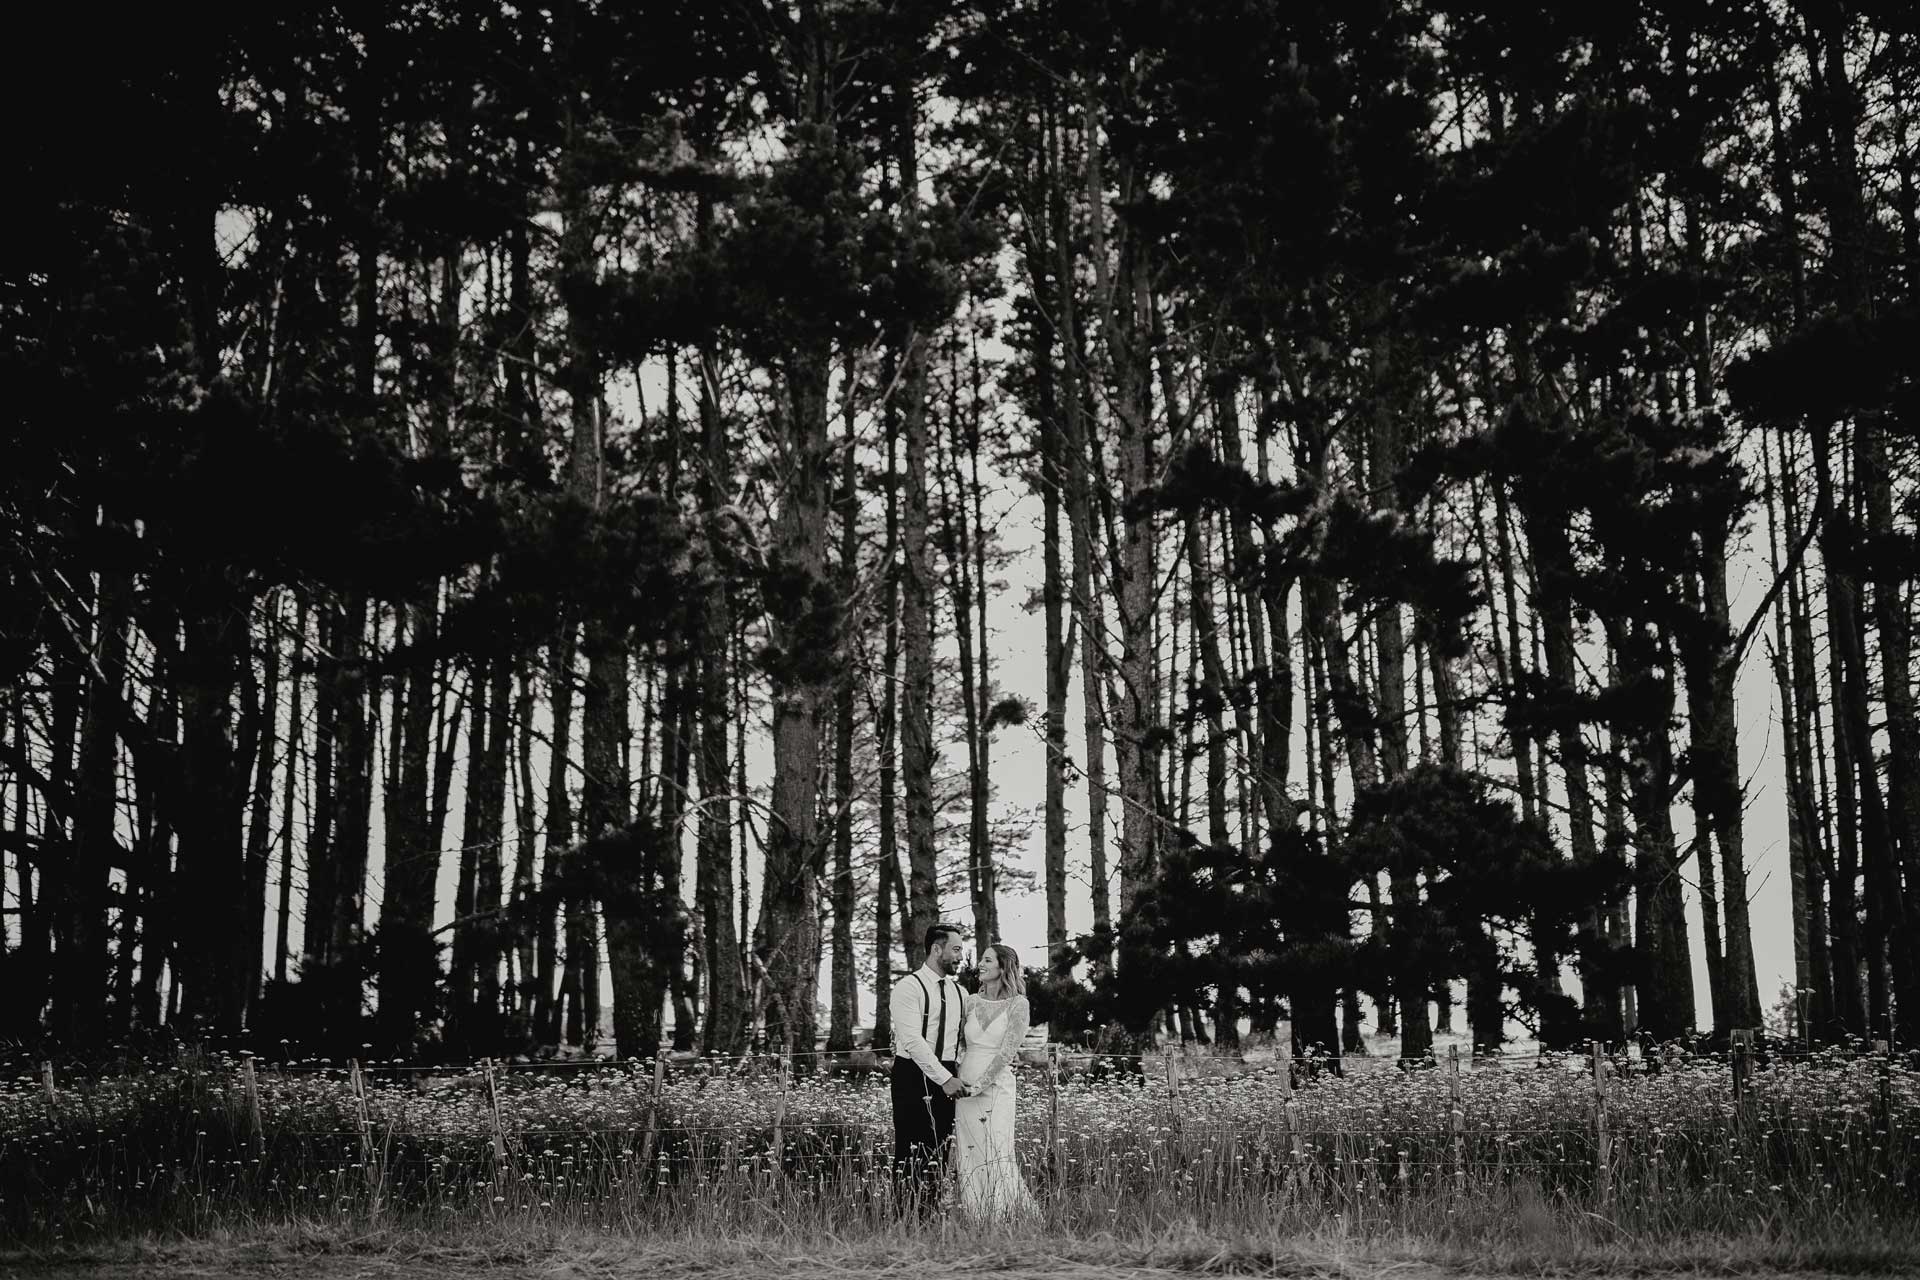 bride and groom wedding portrait photos infront of pine trees at waimauku auckland photos by sarah weber photography